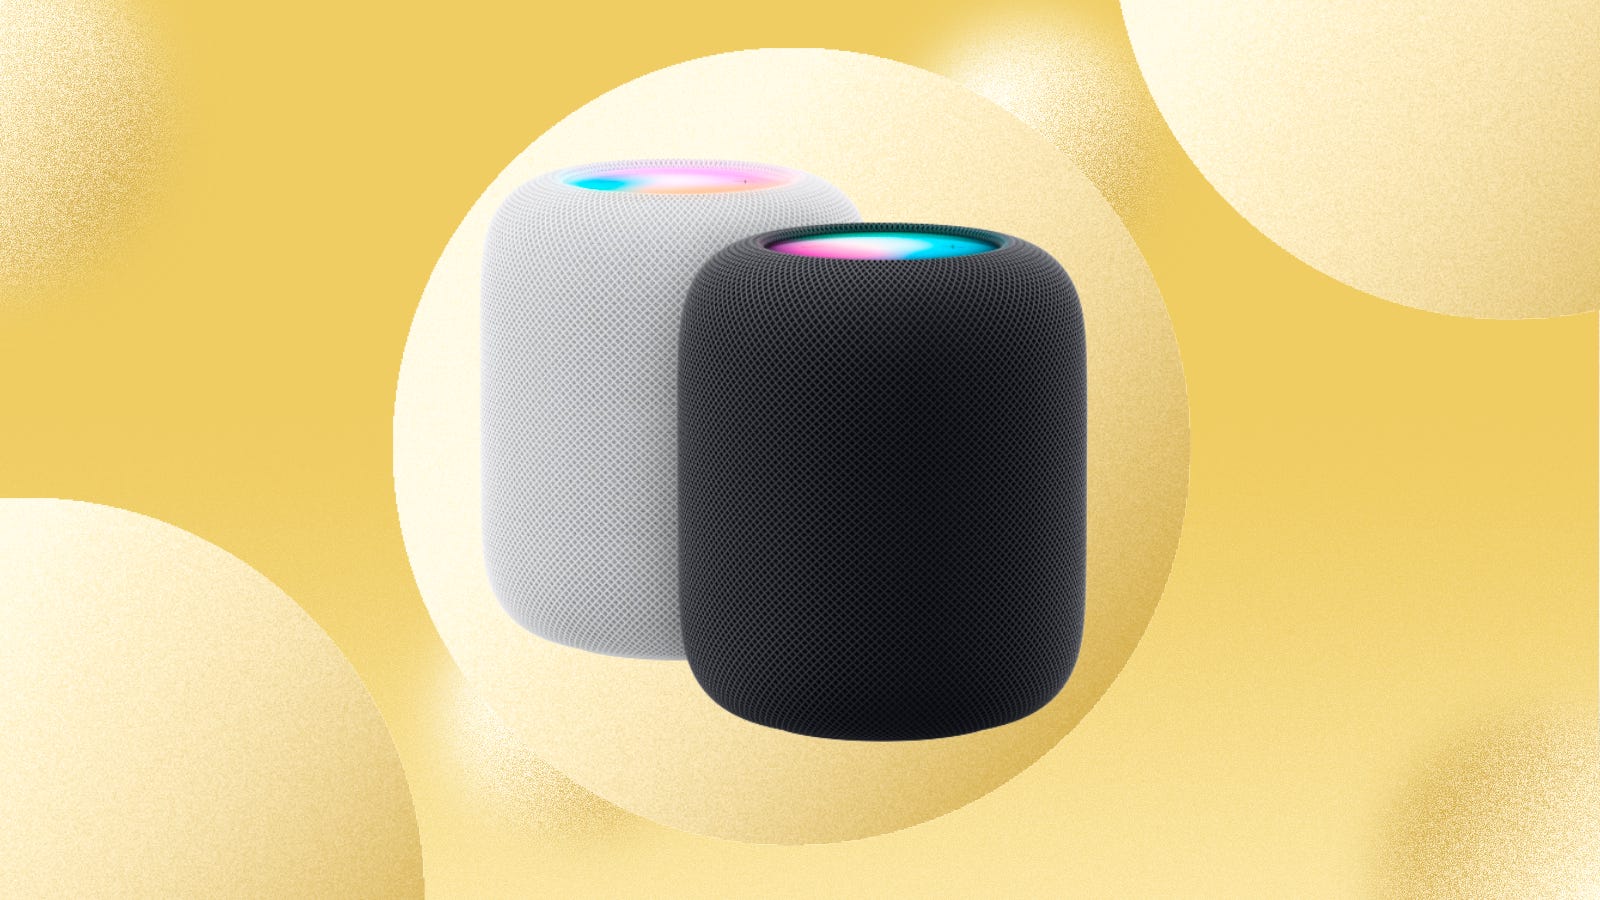 Apple HomePod 2nd-generation in white and midnight colors